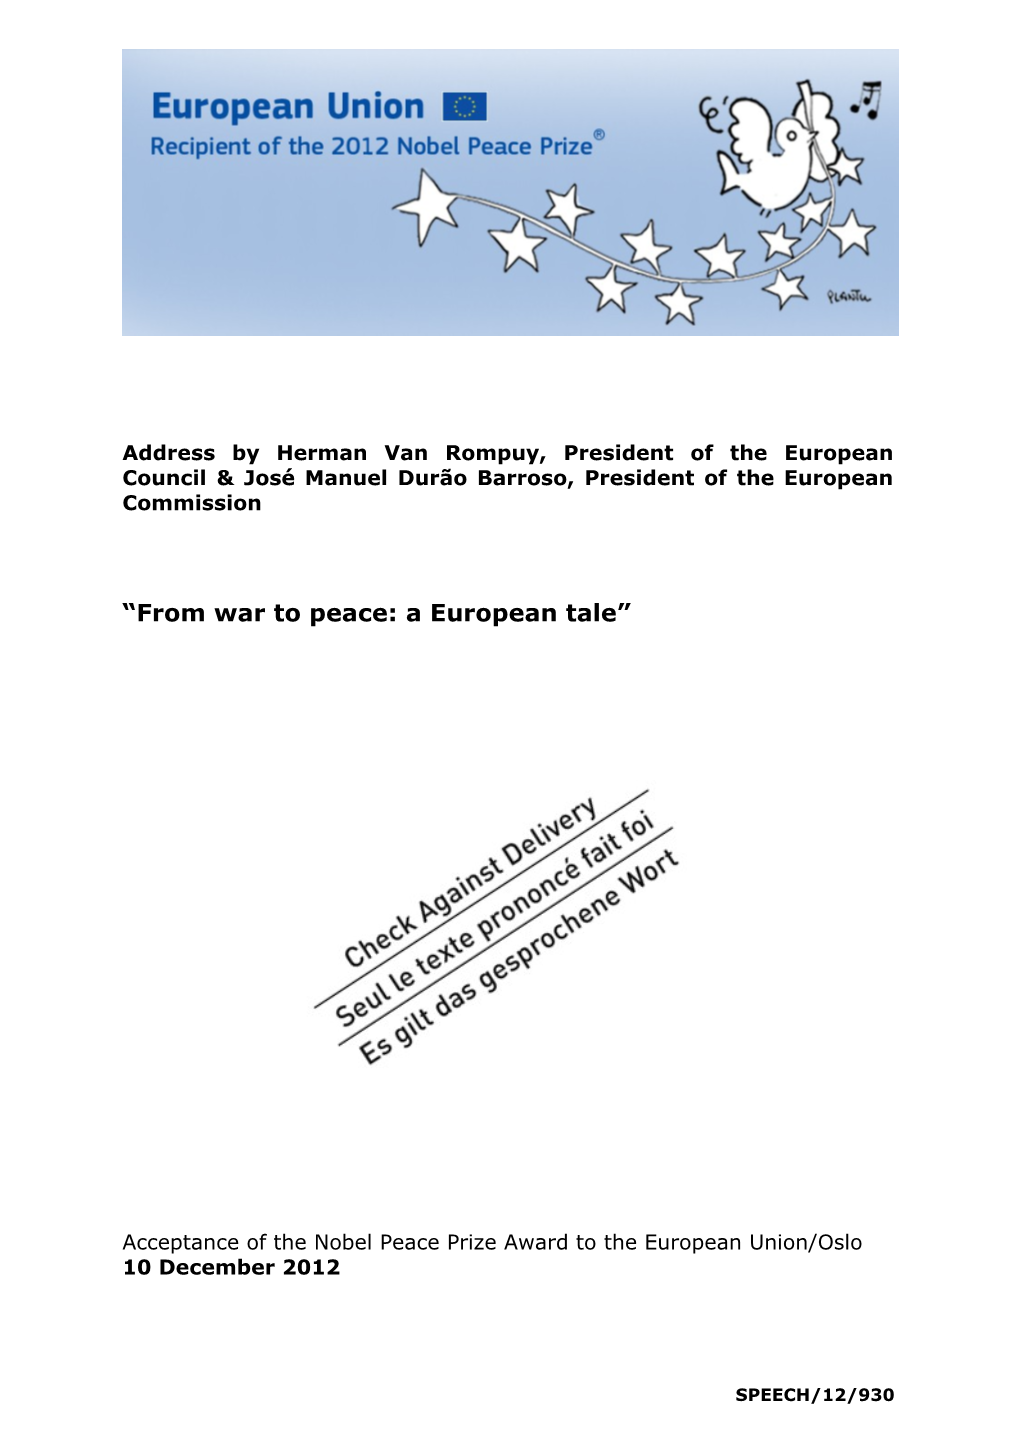 From War to Peace: a European Tale